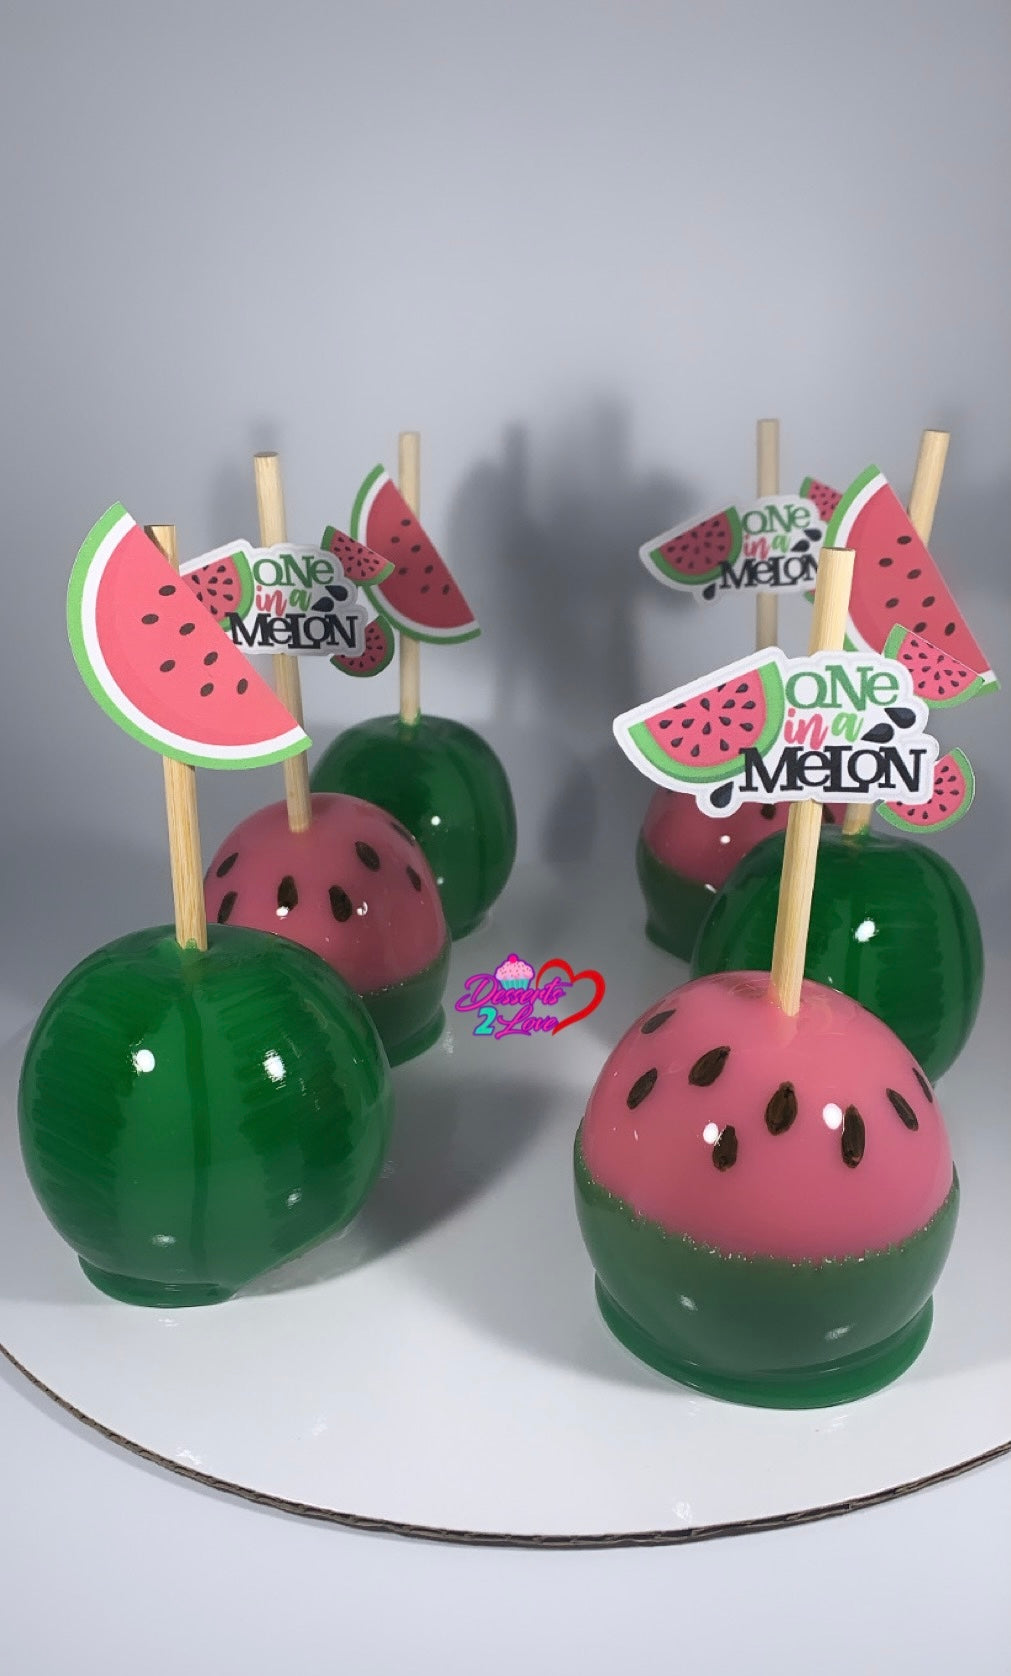 Themed Candy/Chocolate Apples